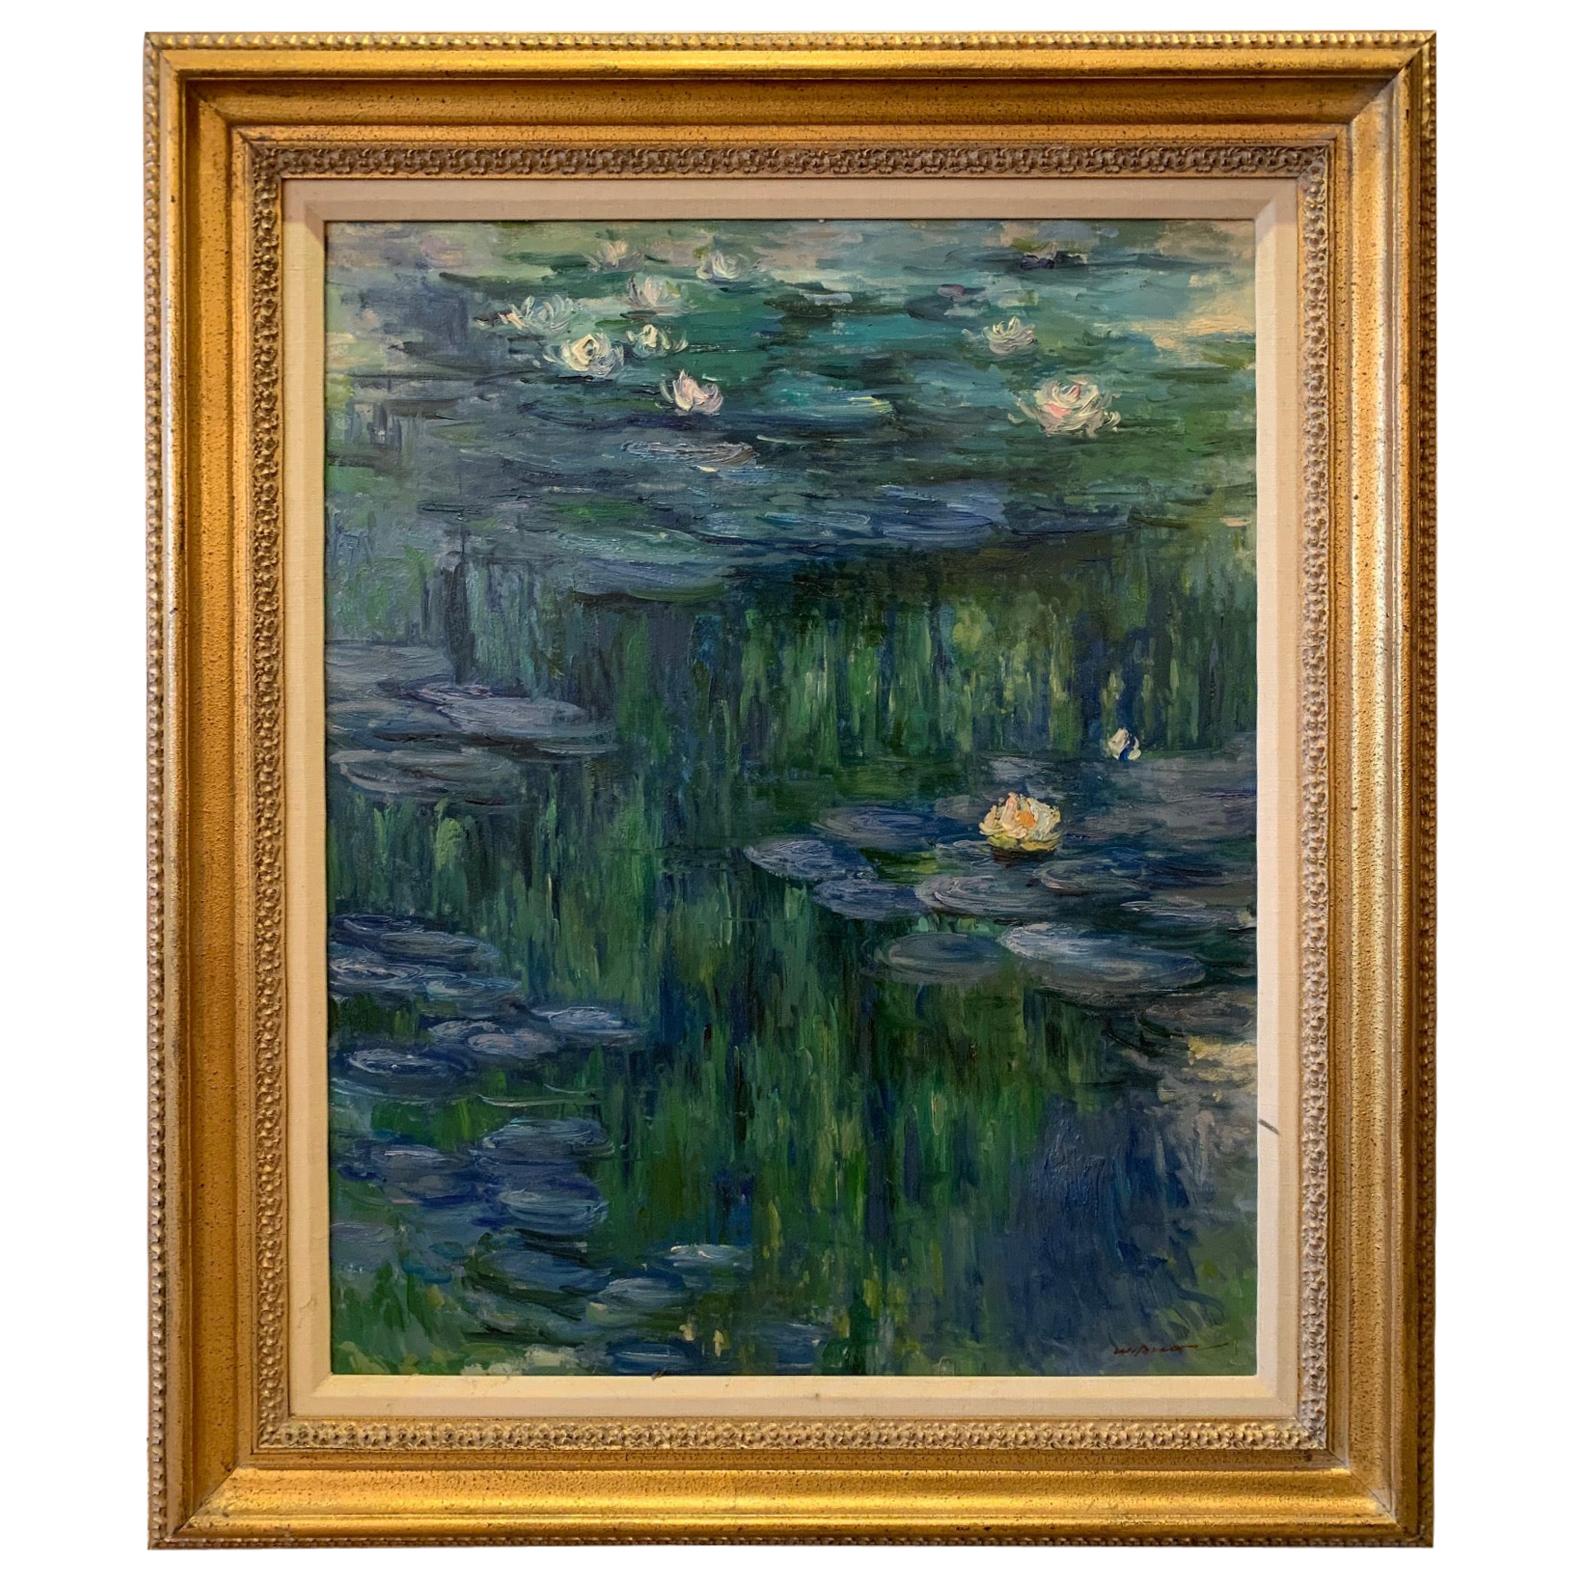 Superb Lily Pond Landscape Painting in the Style of Monet